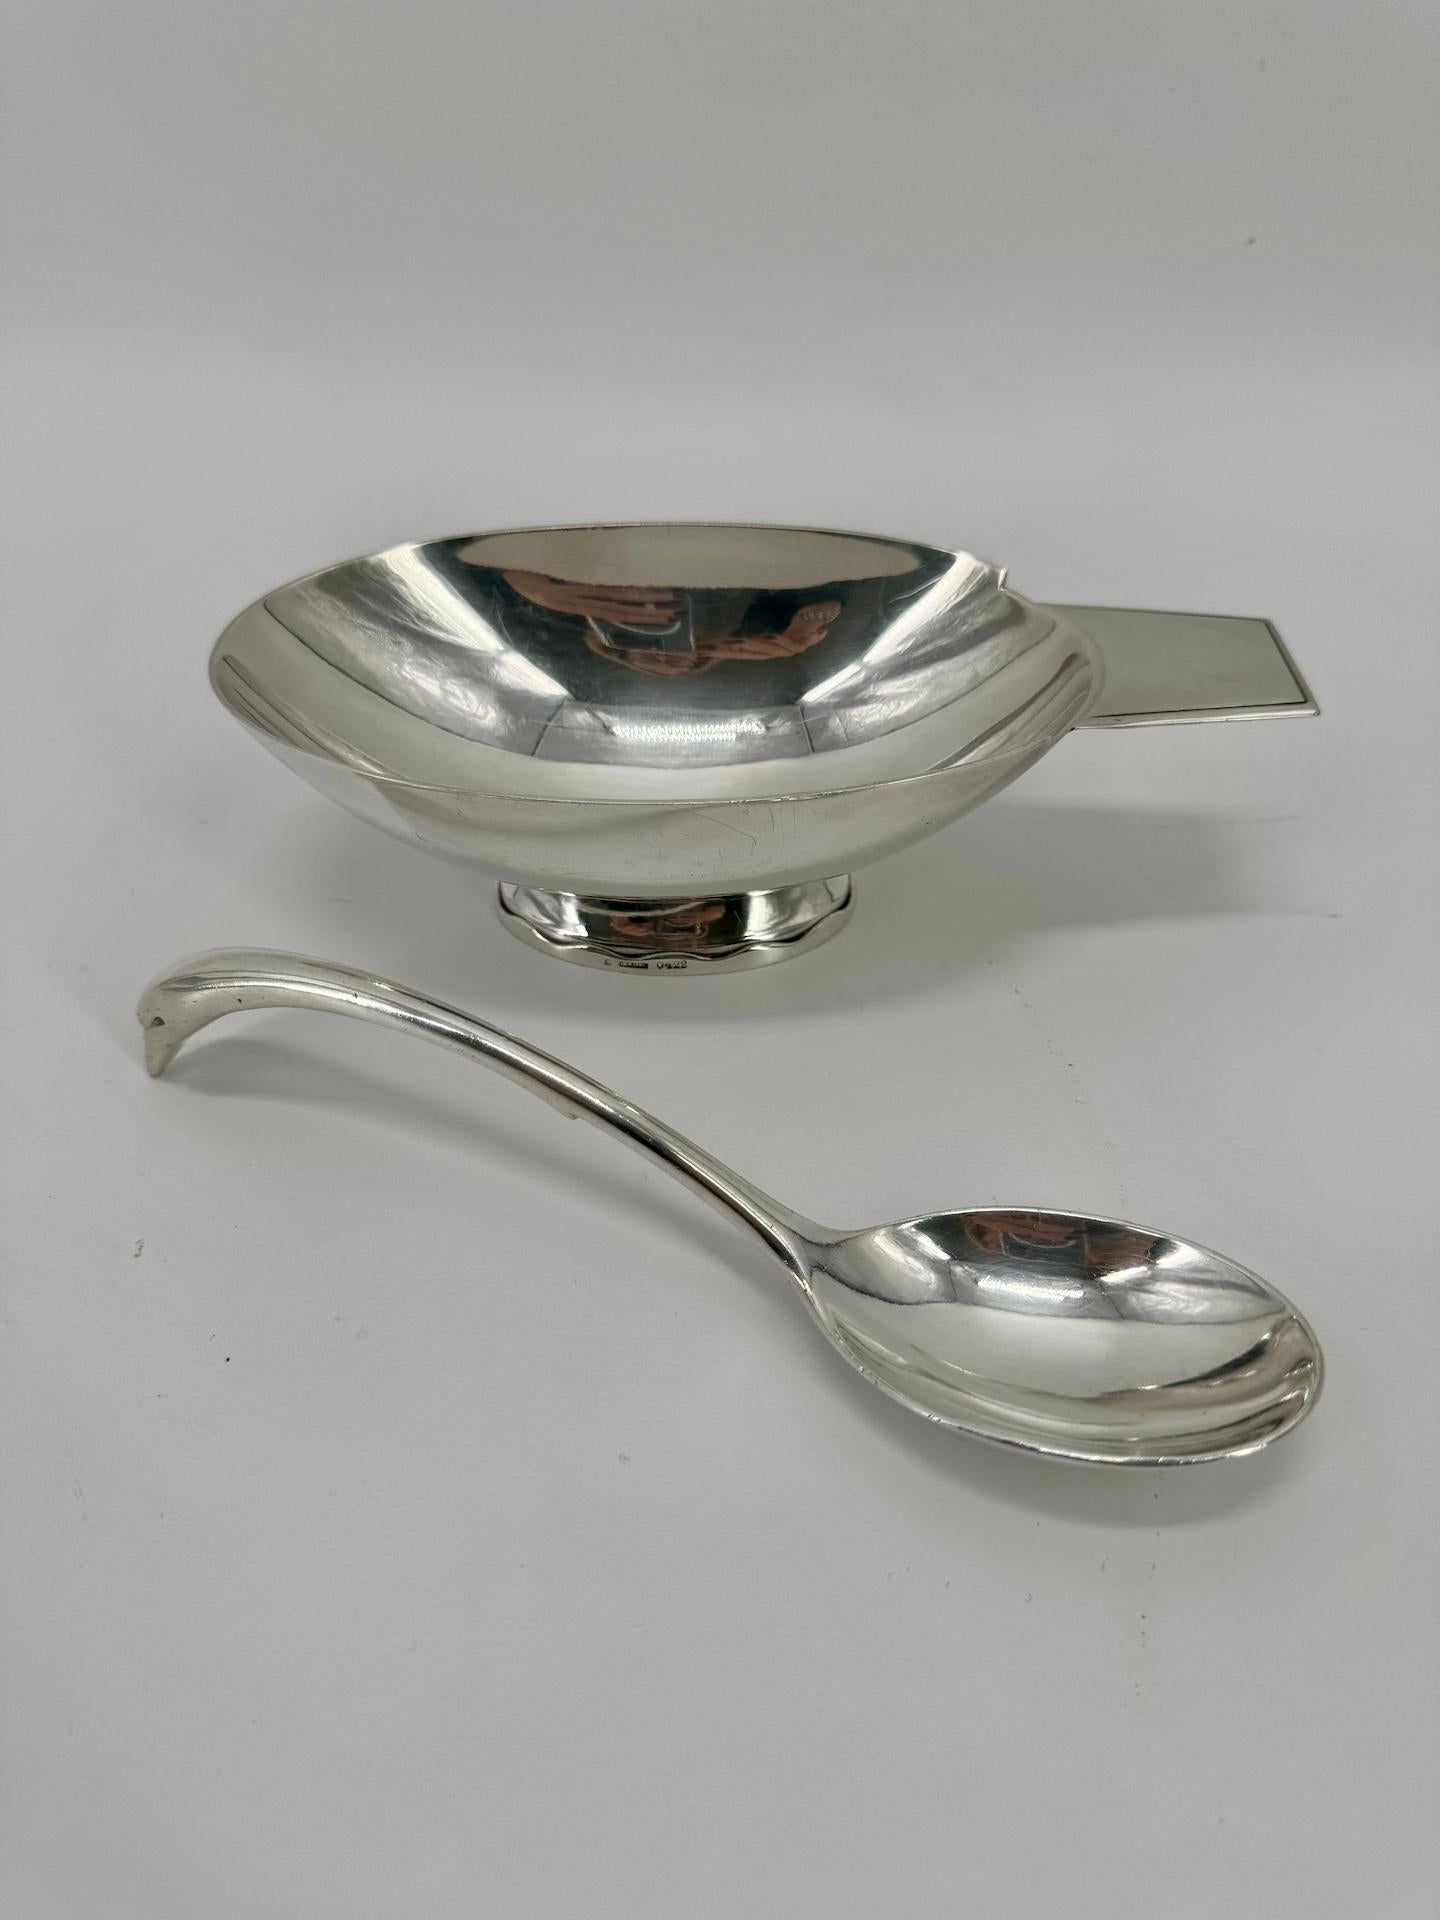 Art Deco Gallia For Christofle, Gravy Boat ’Swan’ and its spoon By Christian Fjerdingstad For Sale